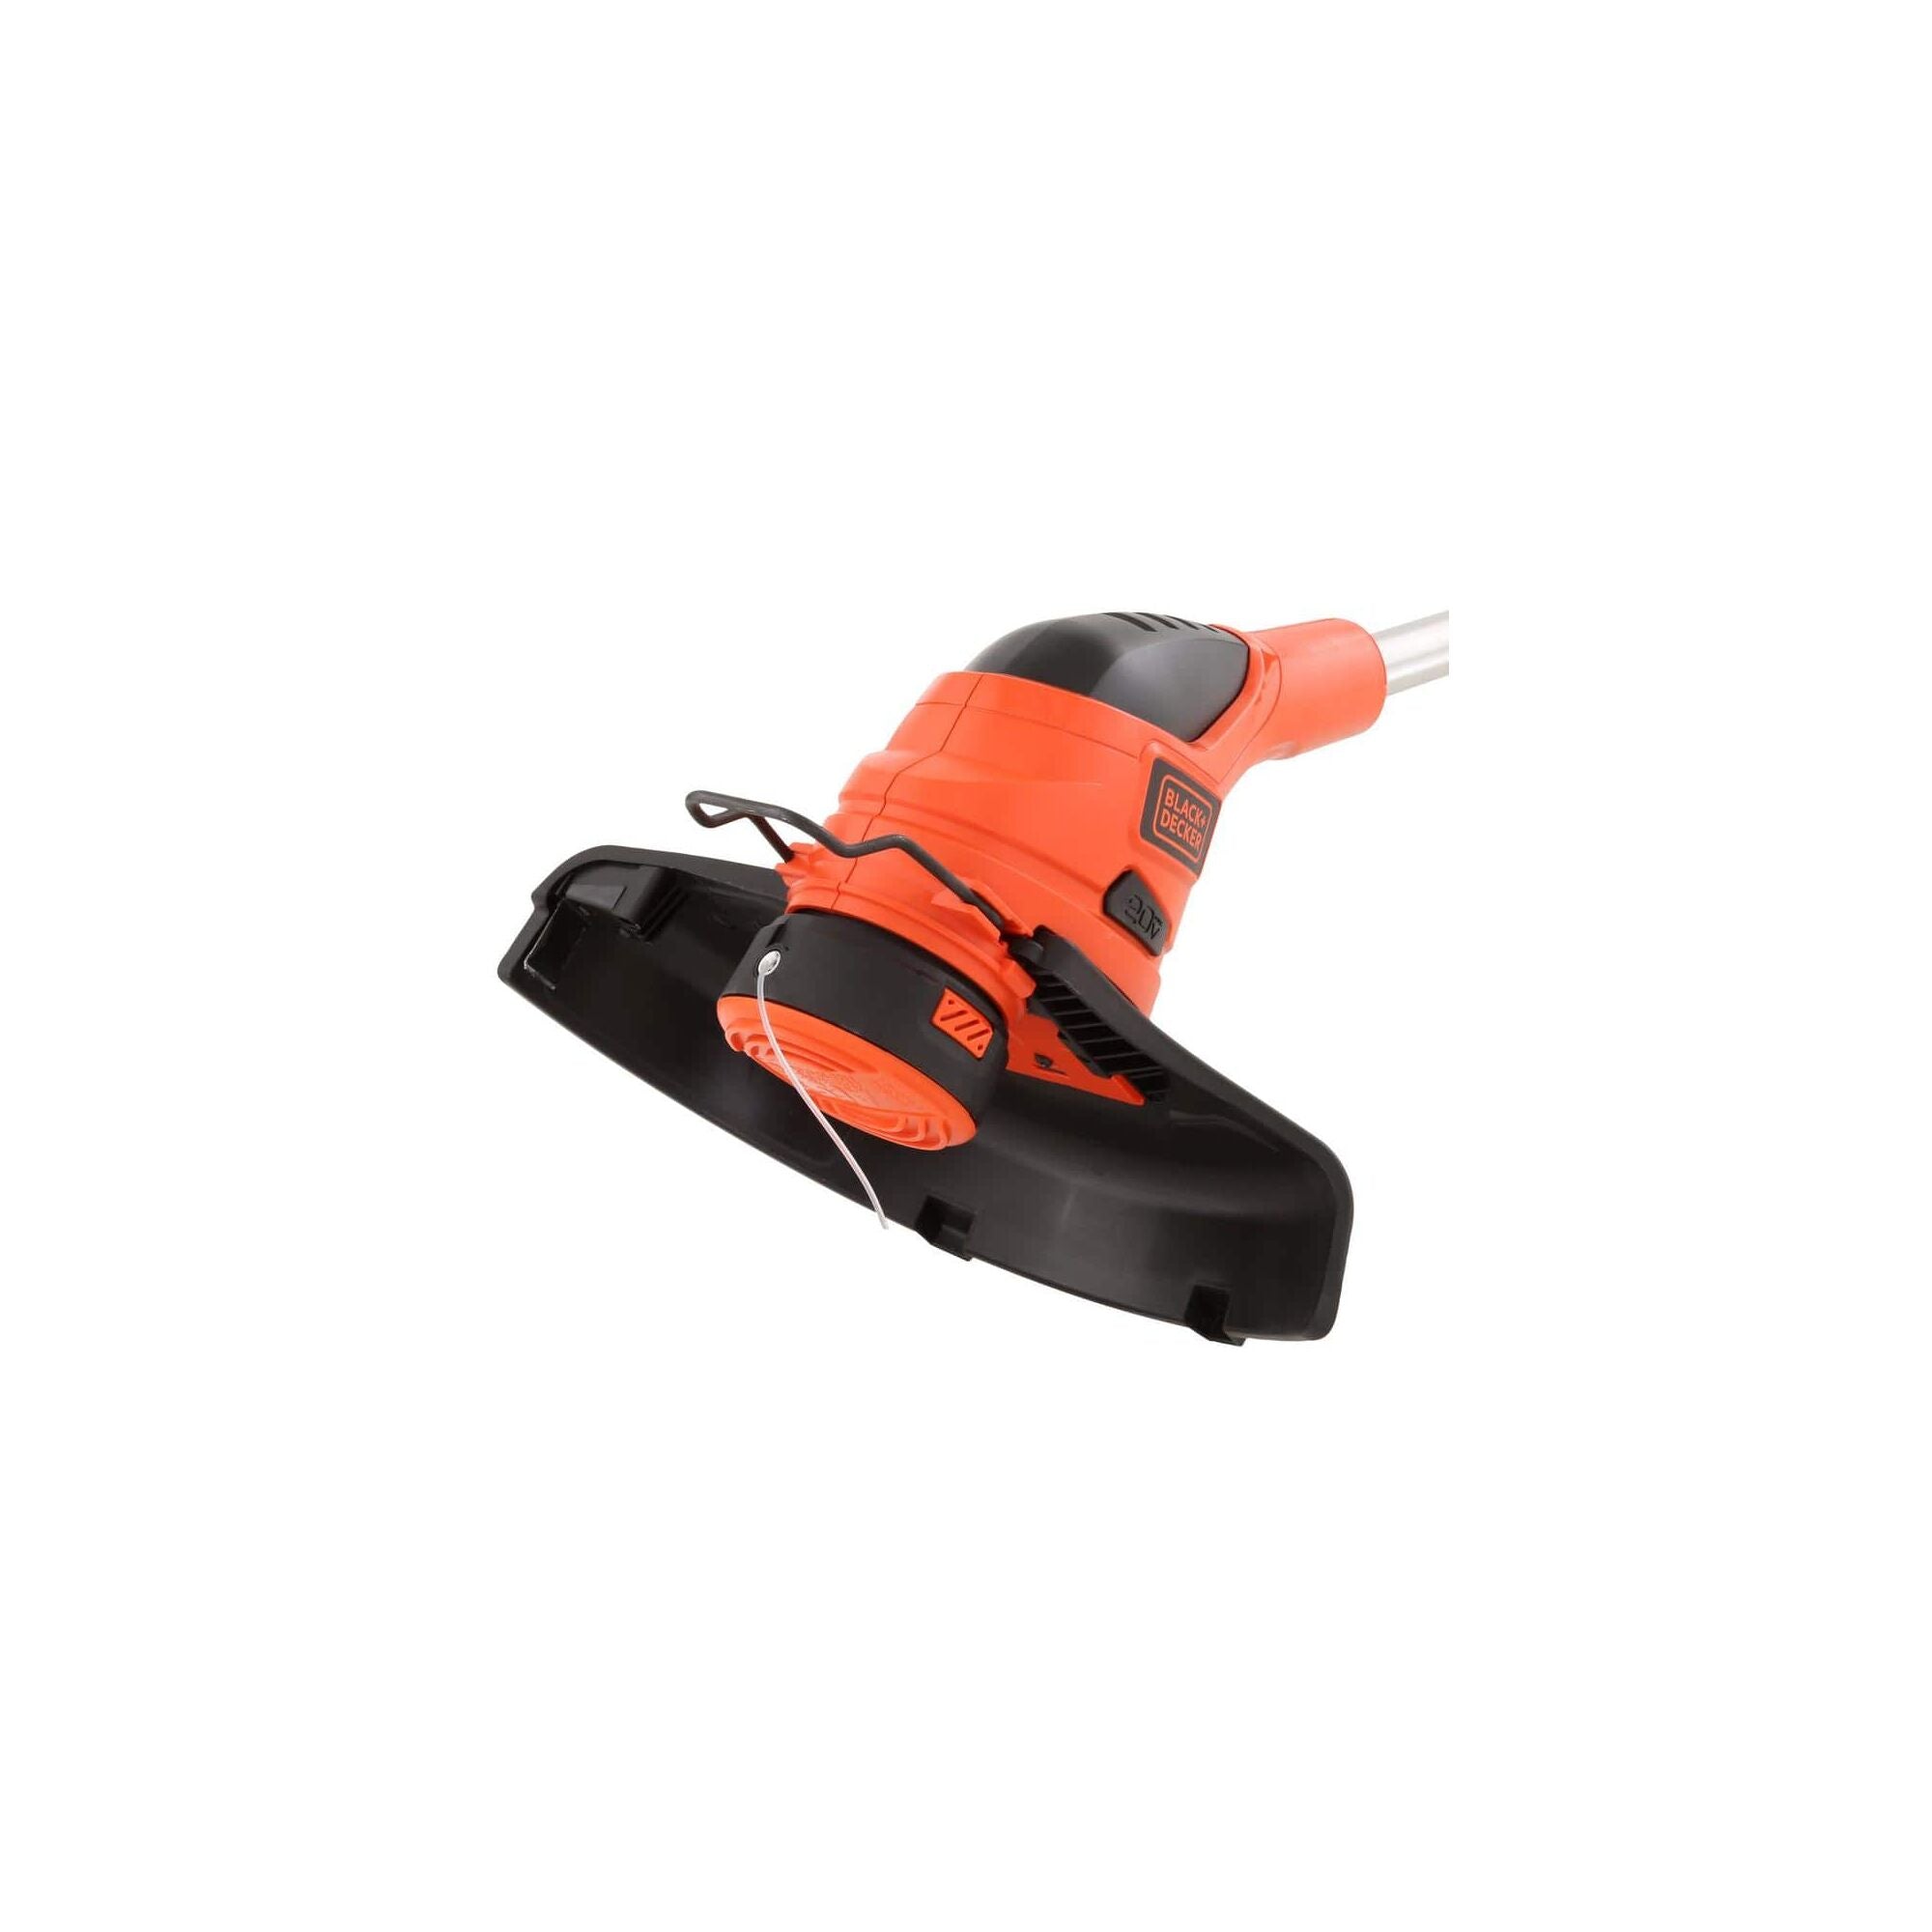 Black & Decker MTC220 12 Inch Lithium Cordless 3 in 1 Trimmer Edger and  Mower, 20 volt Review 